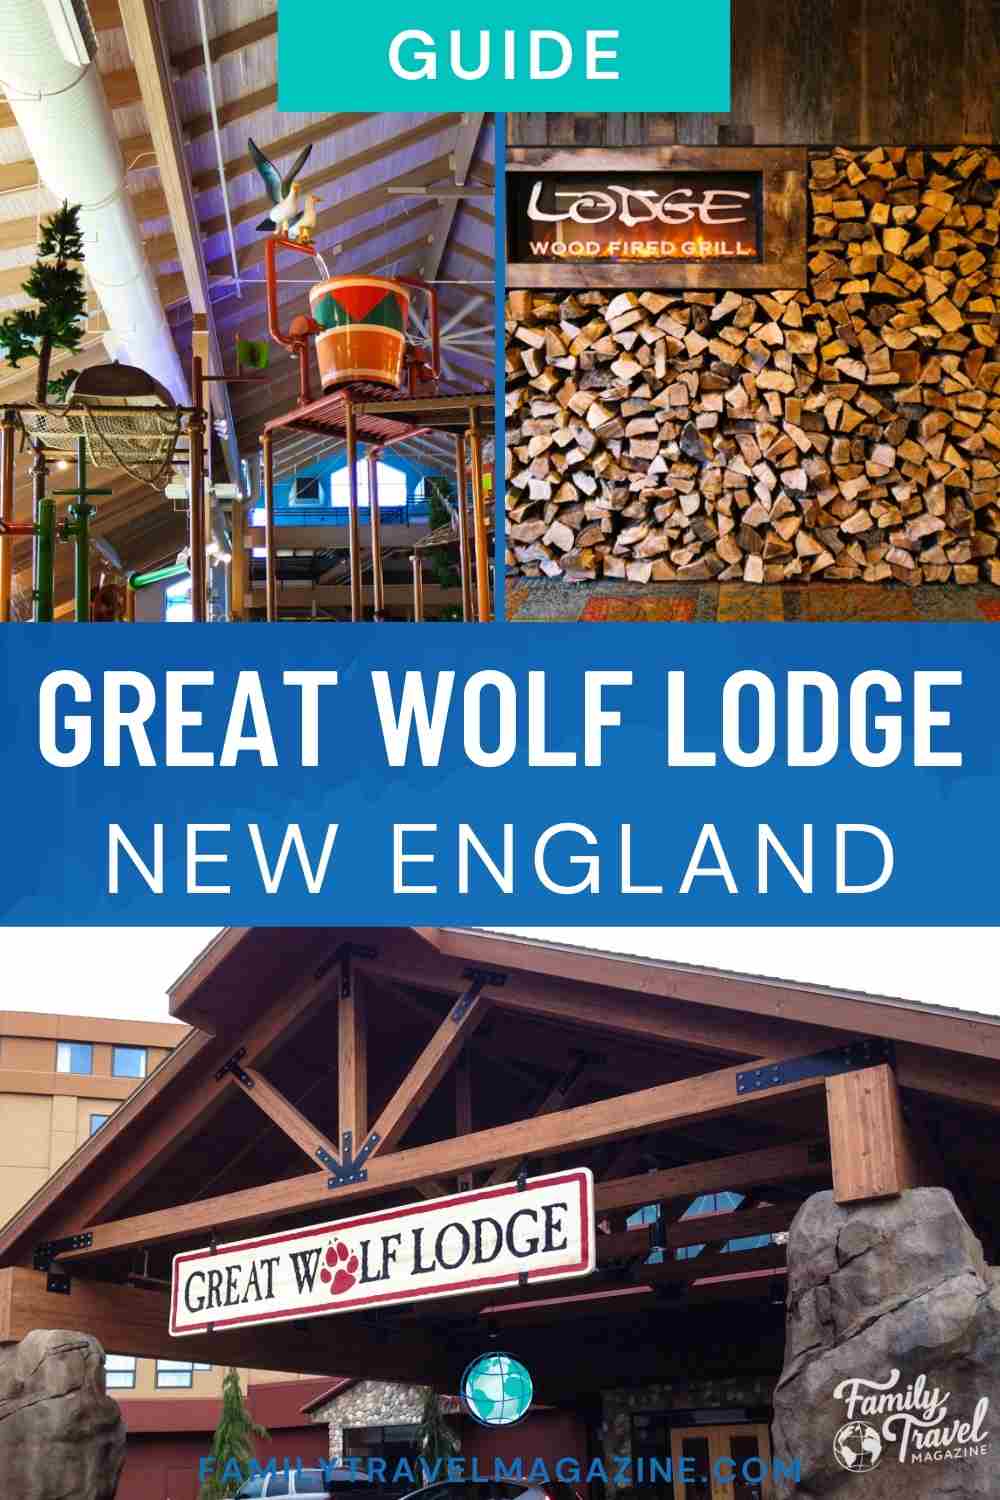 Water park bucket, large wood pill, entrance to Great Wolf Lodge.